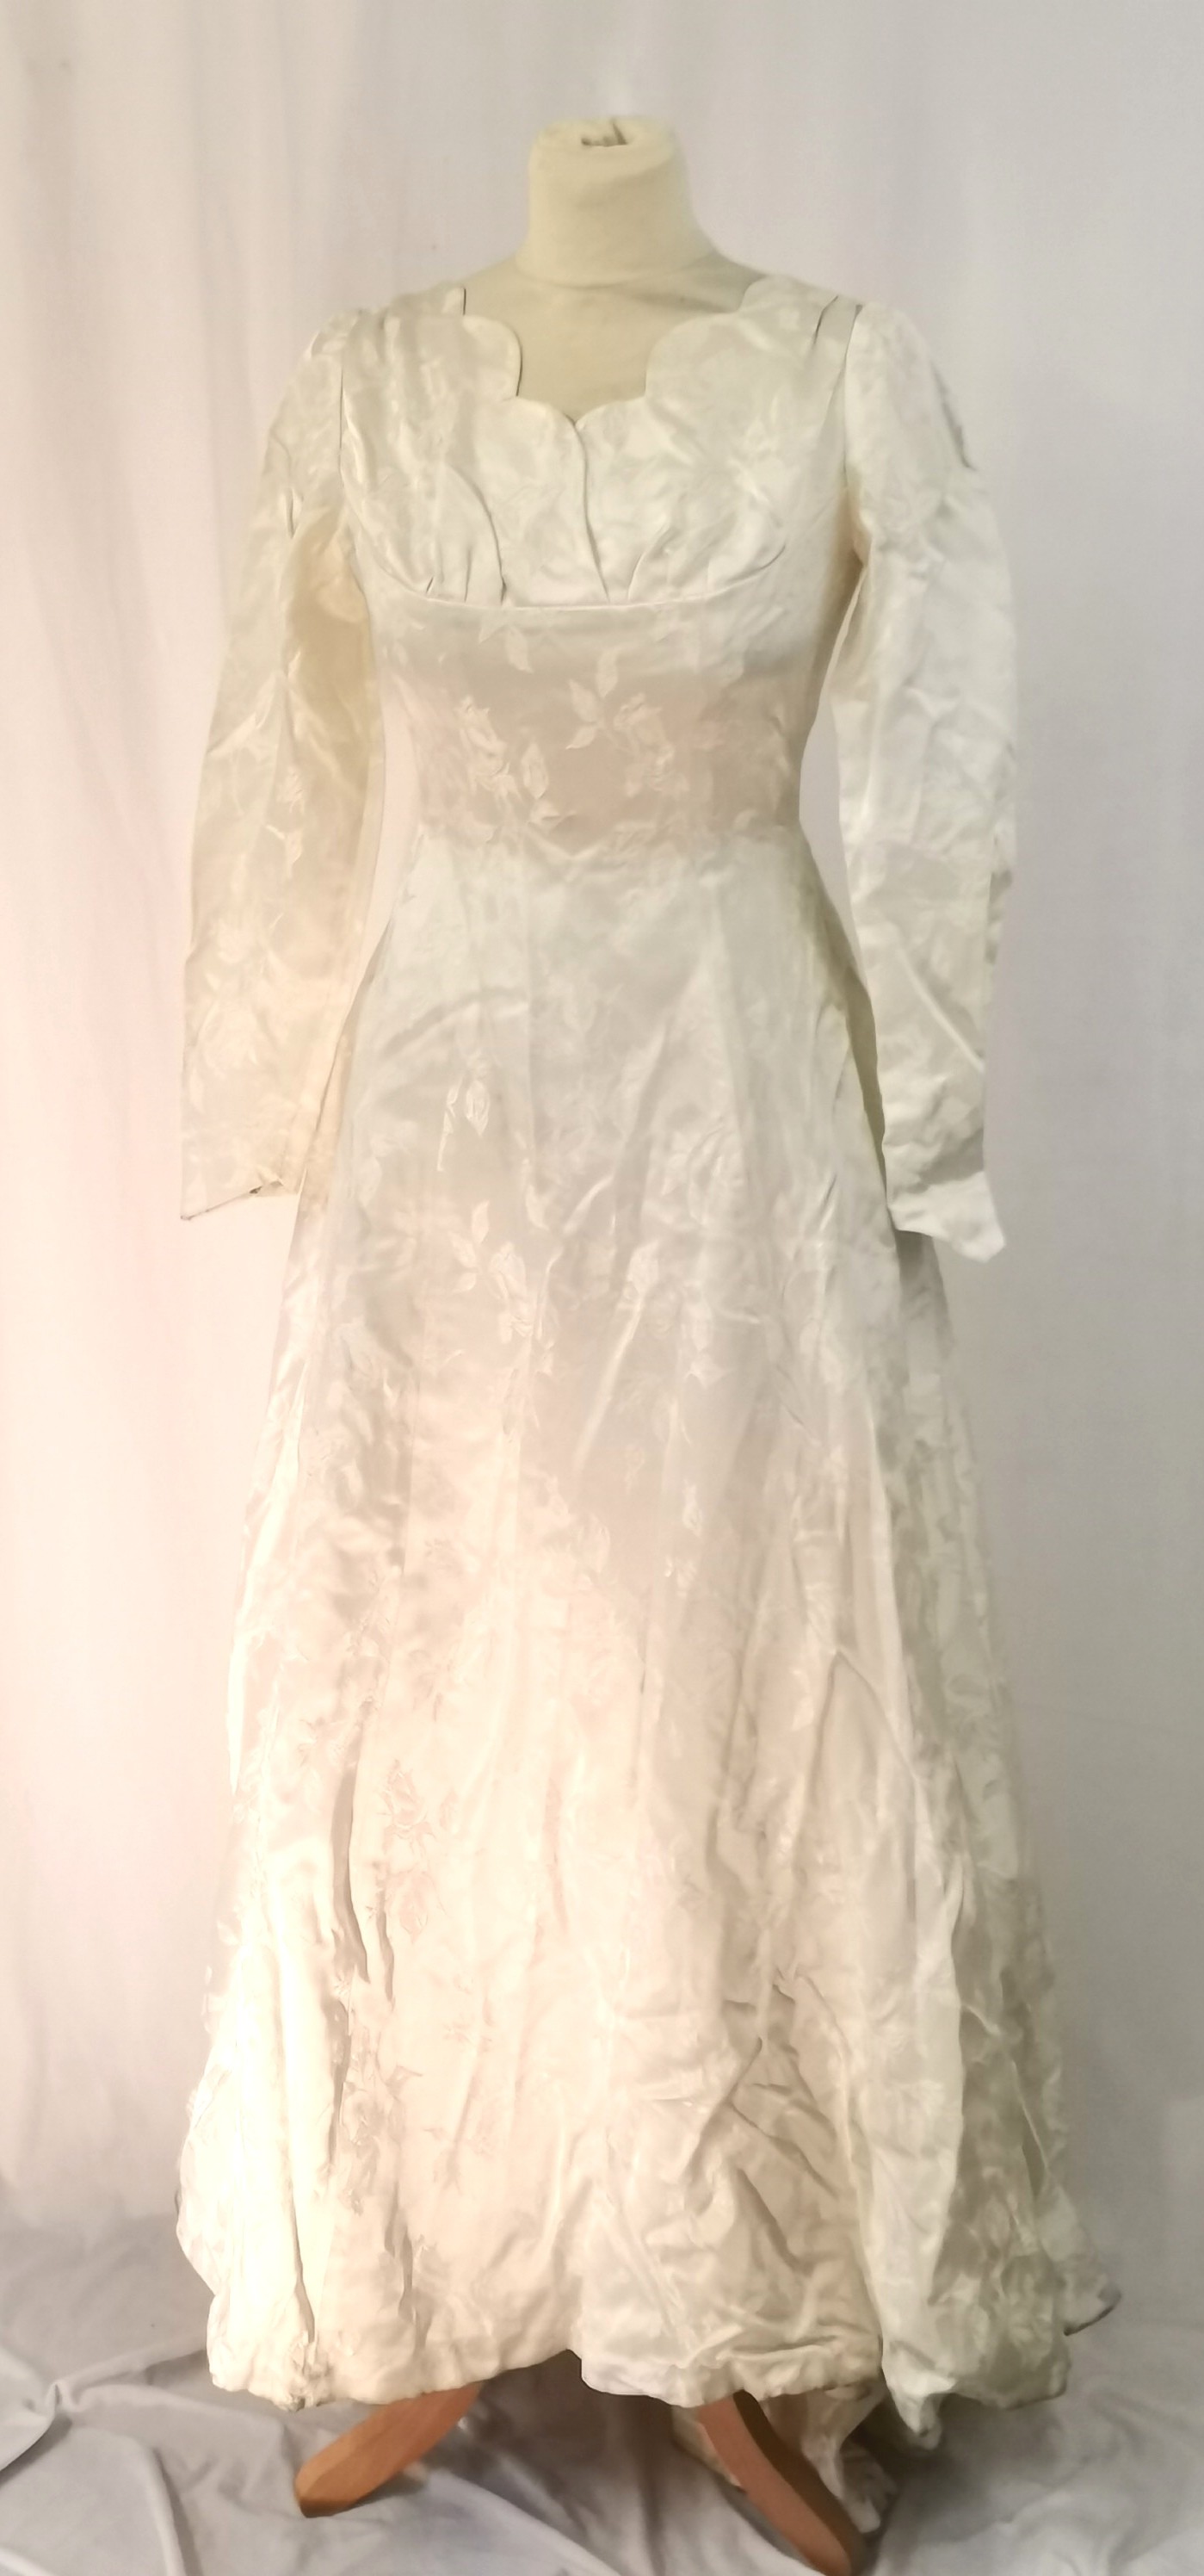 1950s Satin long sleeved wedding dress measuring 92cm bust. In used condition with staining to the